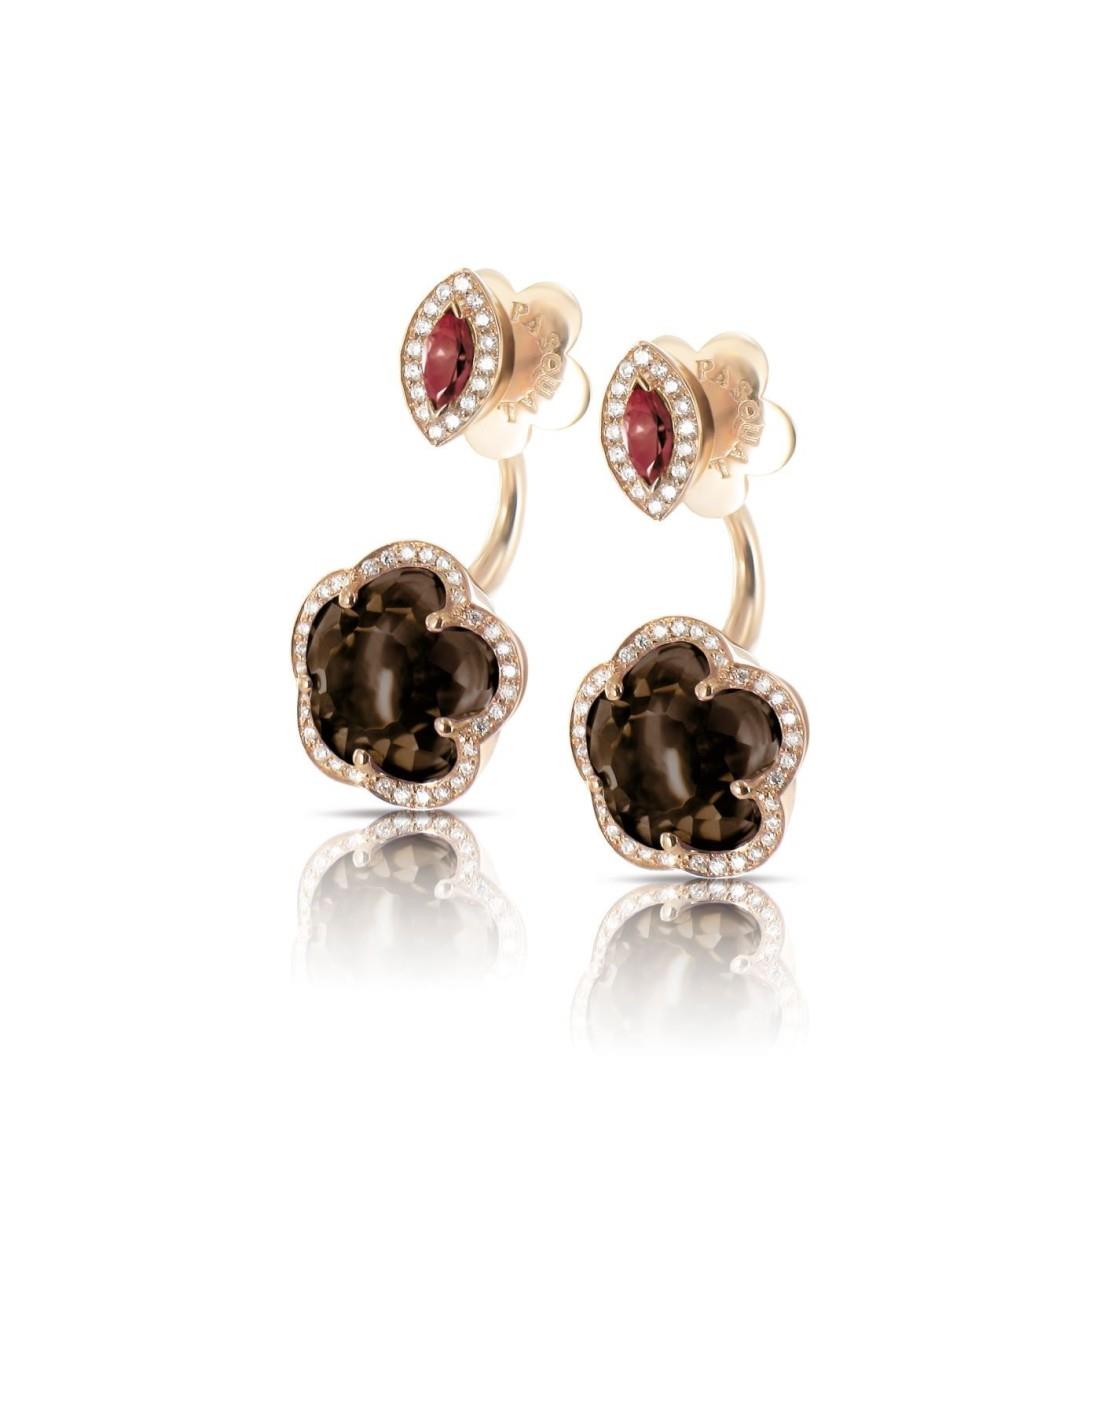 Bon Ton earrings in red gold with diamonds, smoky quartz and rhodolite - PASQUALE BRUNI